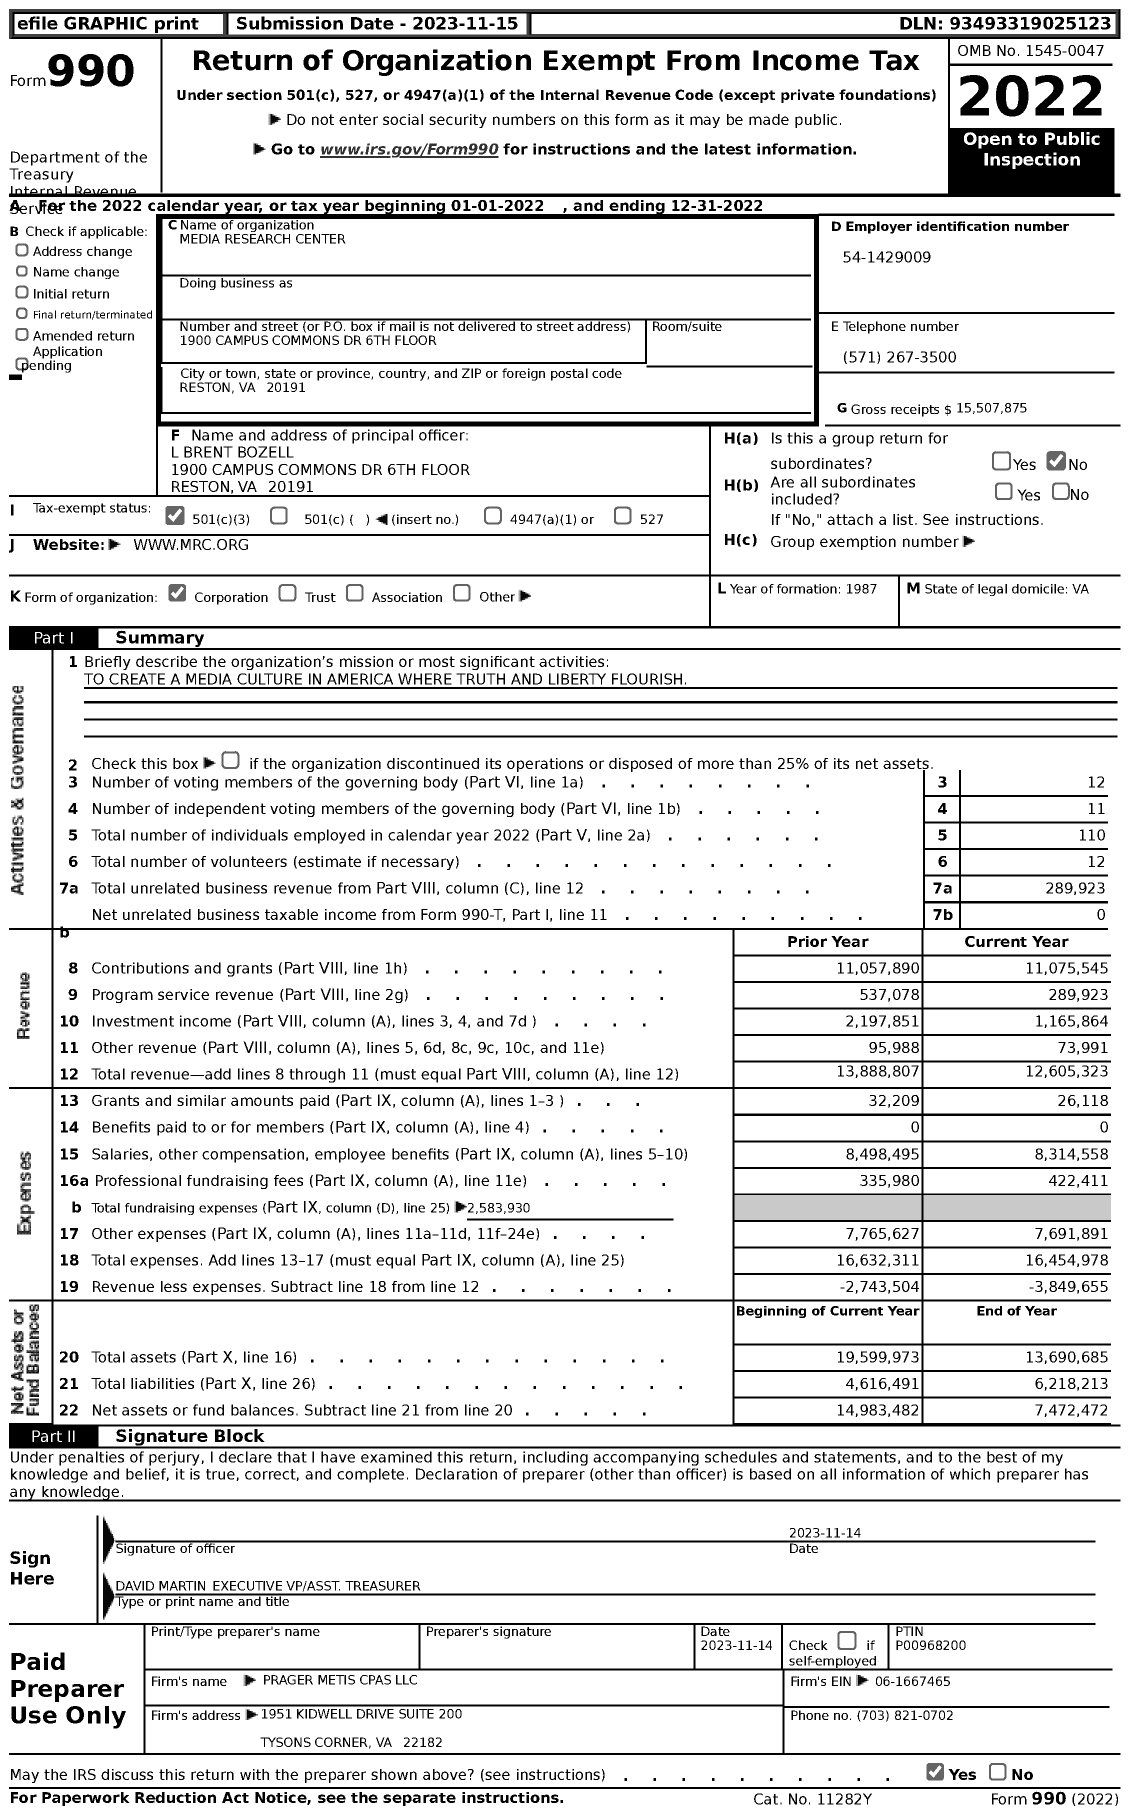 Image of first page of 2022 Form 990 for Media Research Center (MRC)